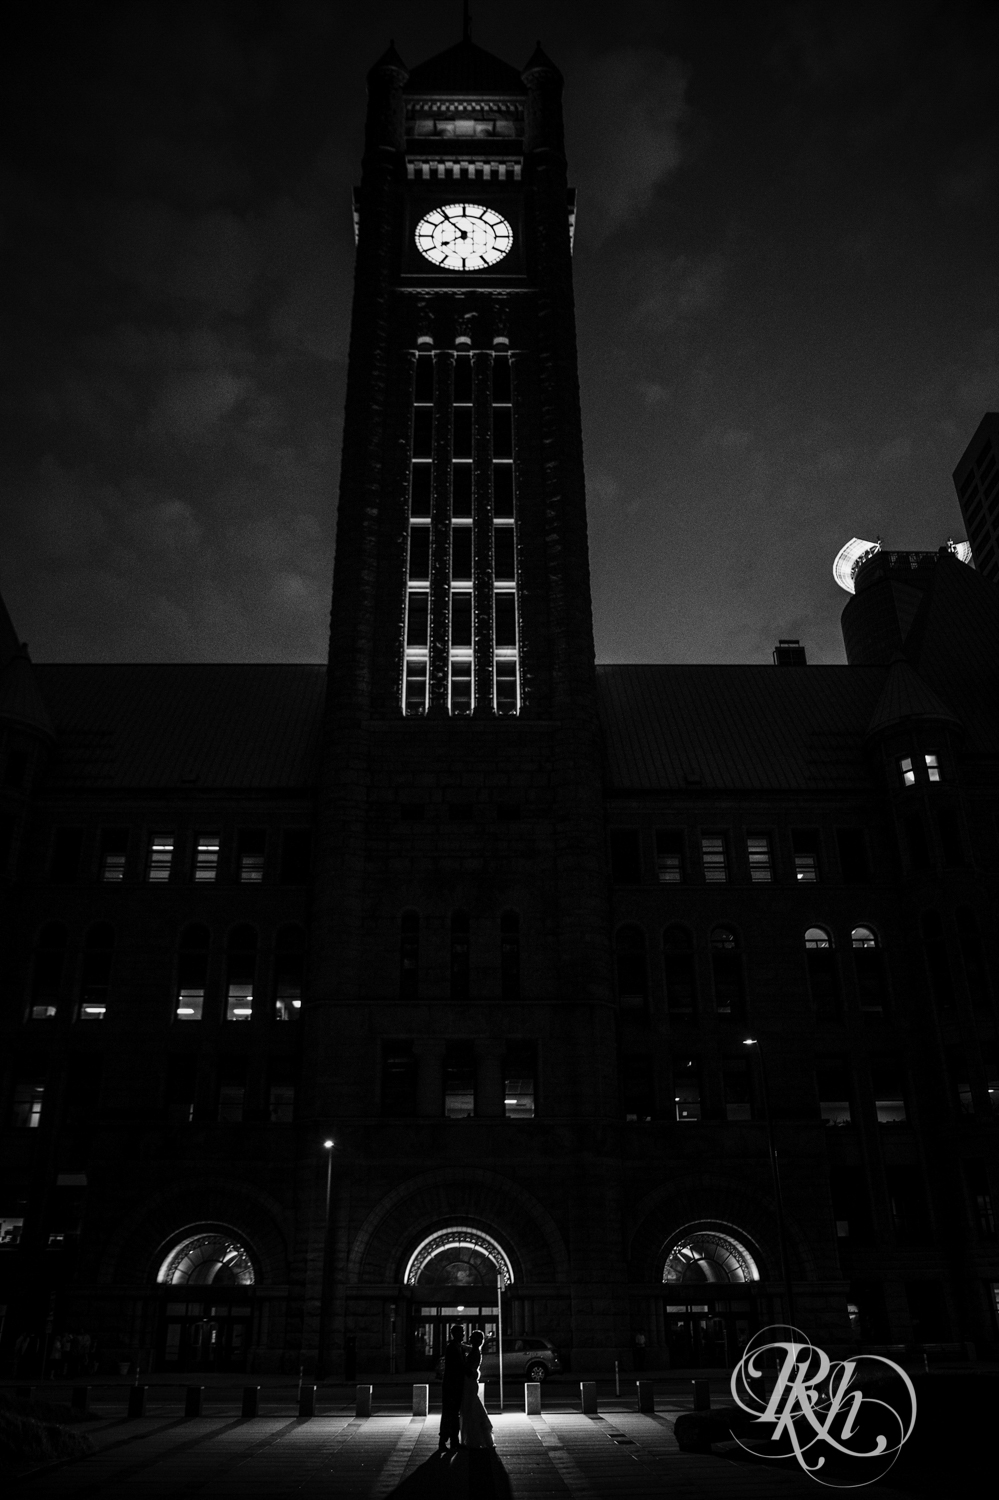 Bride and groom kiss at night under clock tower in Minneapolis City Hall in Minneapolis, Minnesota.